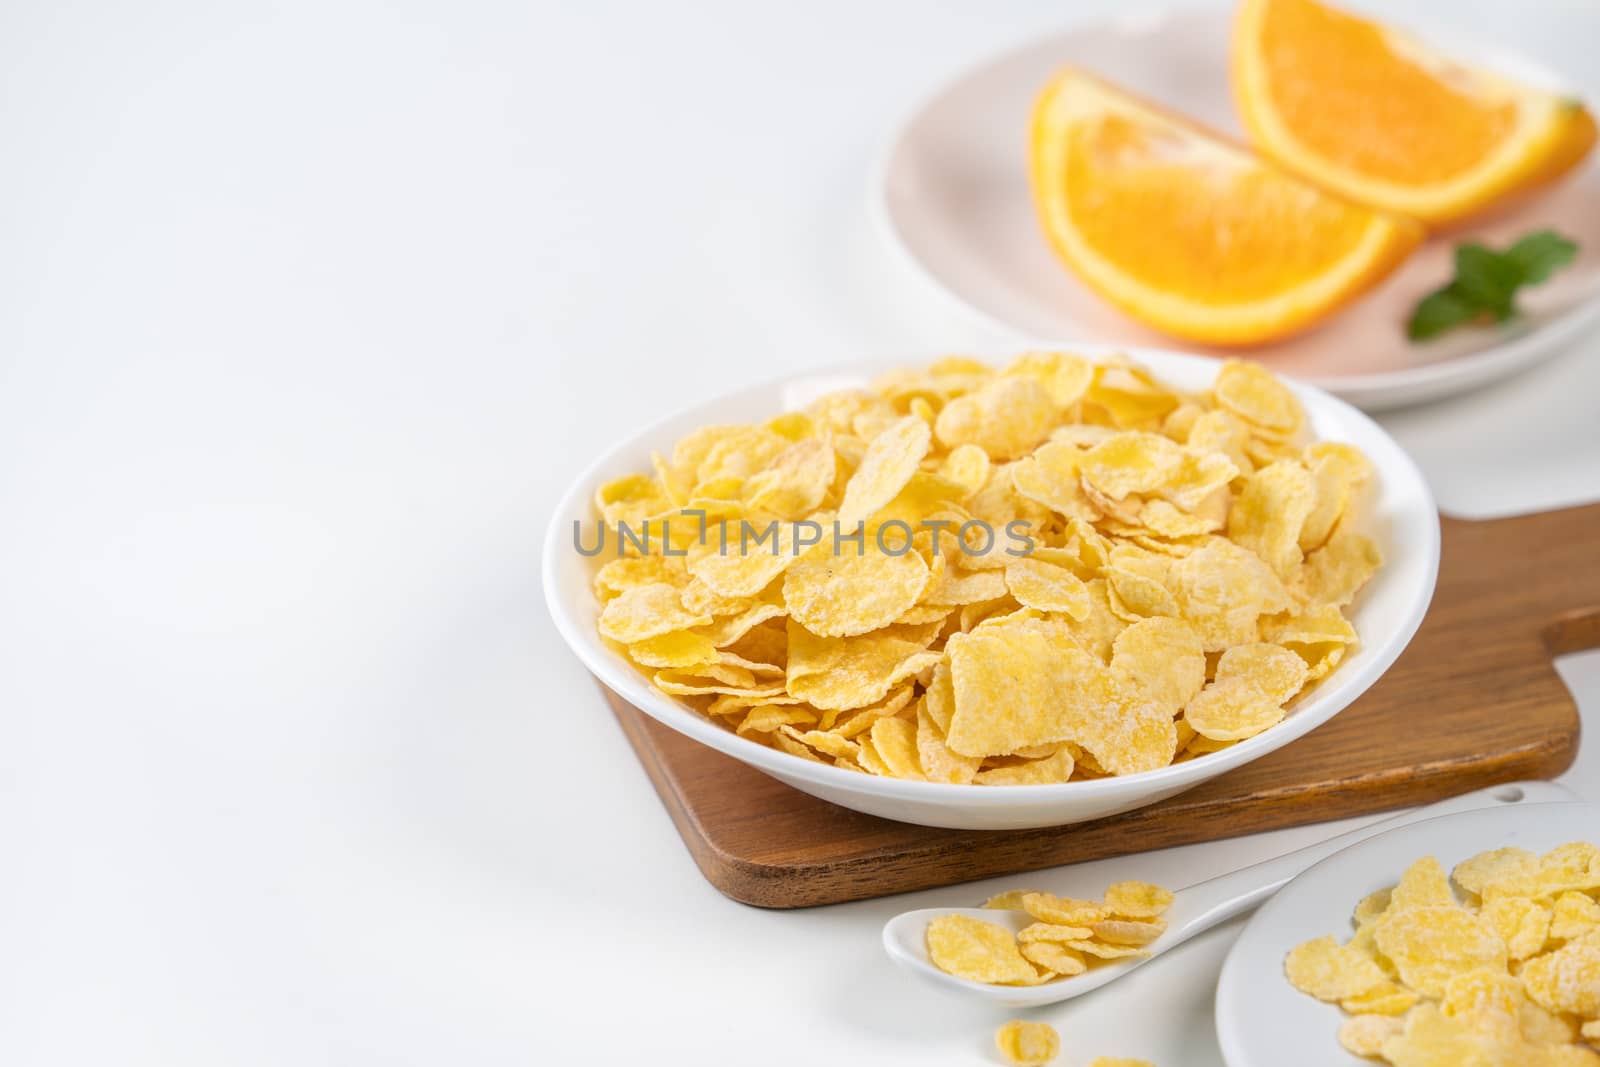 Corn flakes bowl sweeties with milk and orange on white background, close up, fresh and healthy breakfast design concept.